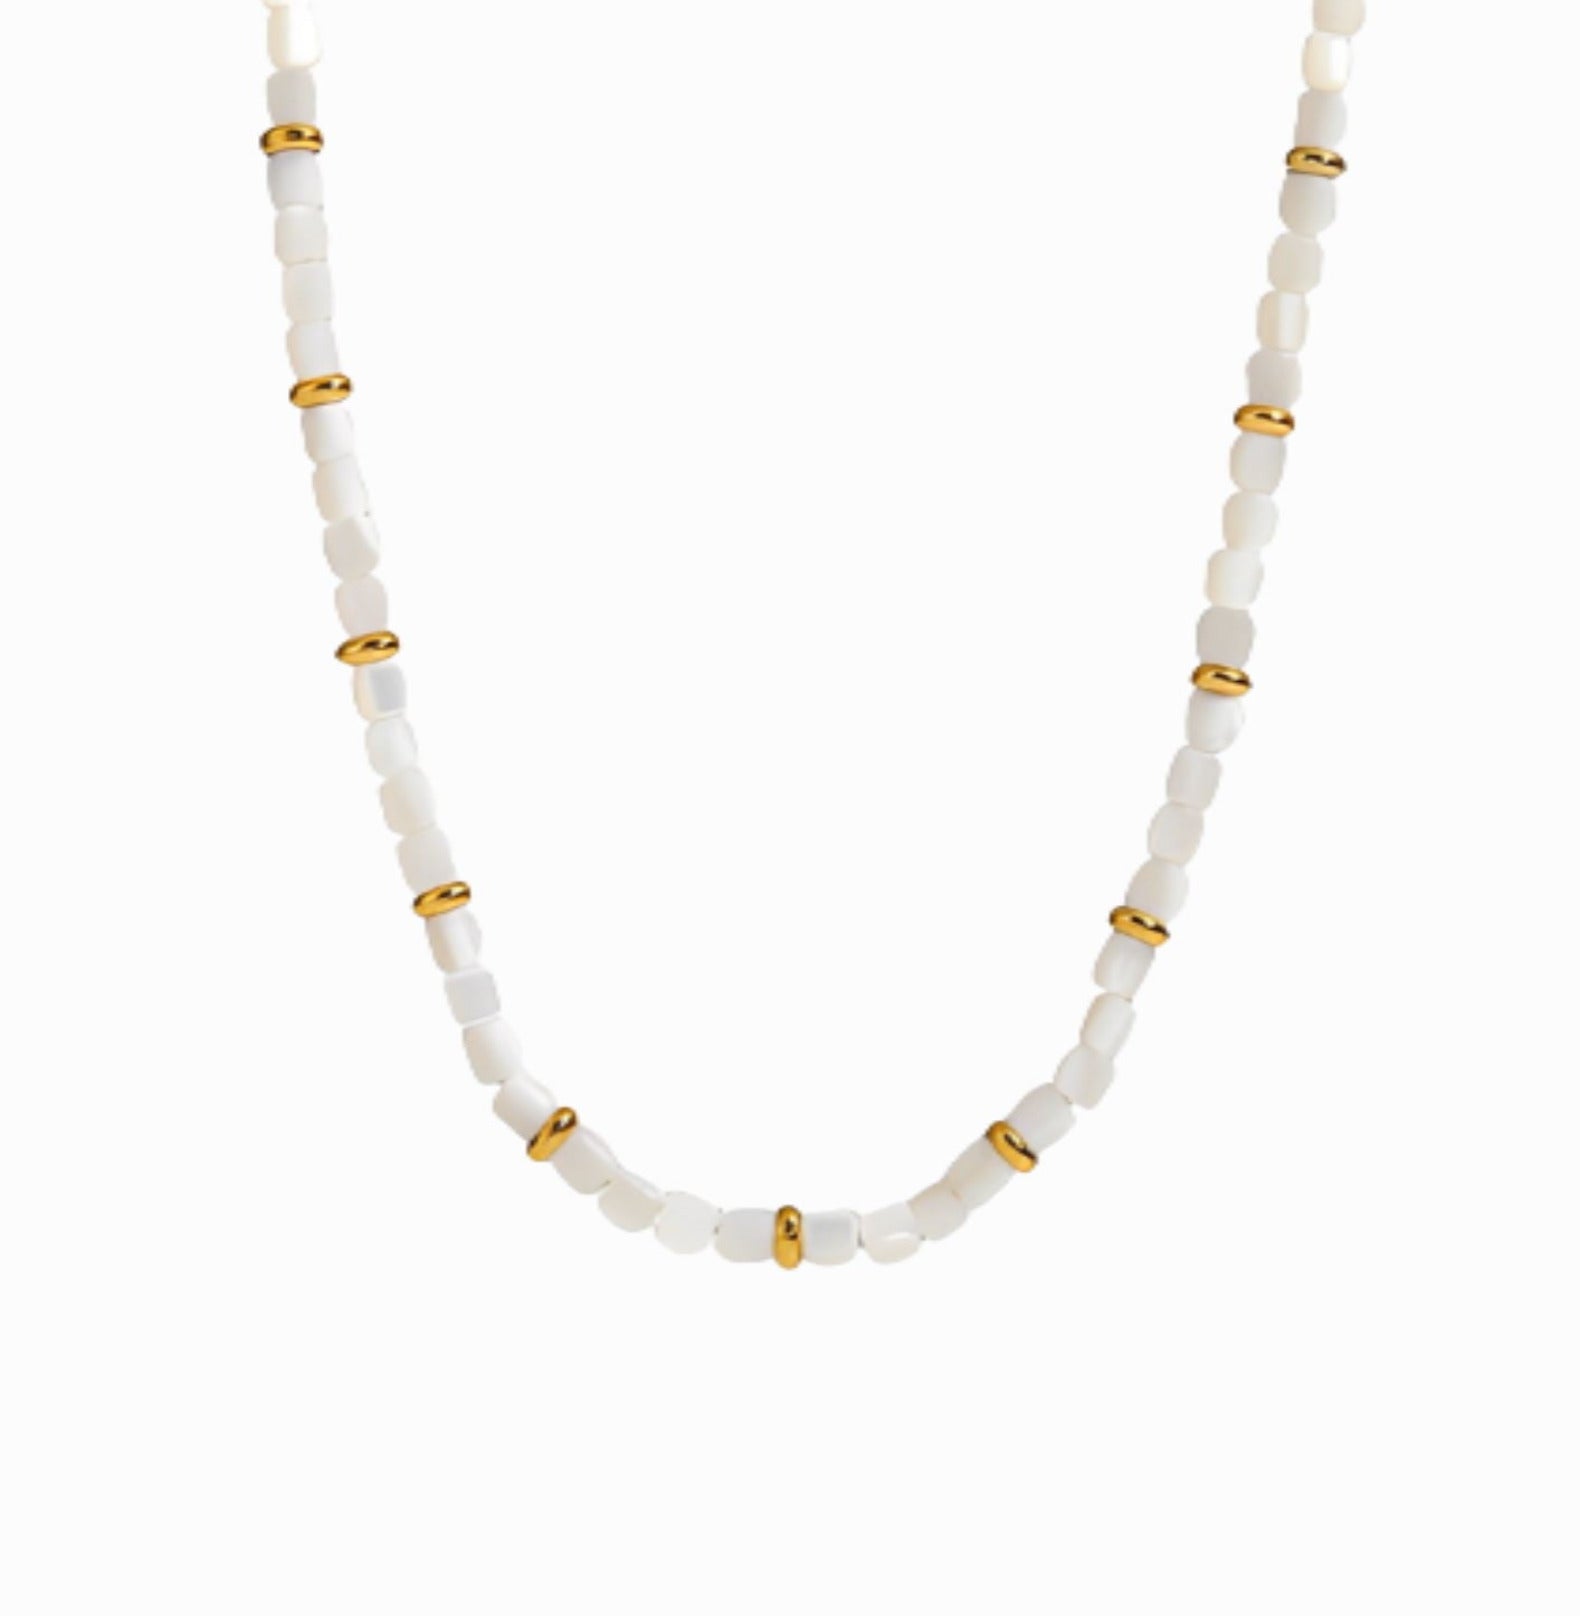 WHITE PEARL NECKLACE neck Yubama Jewelry Online Store - The Elegant Designs of Gold and Silver ! 